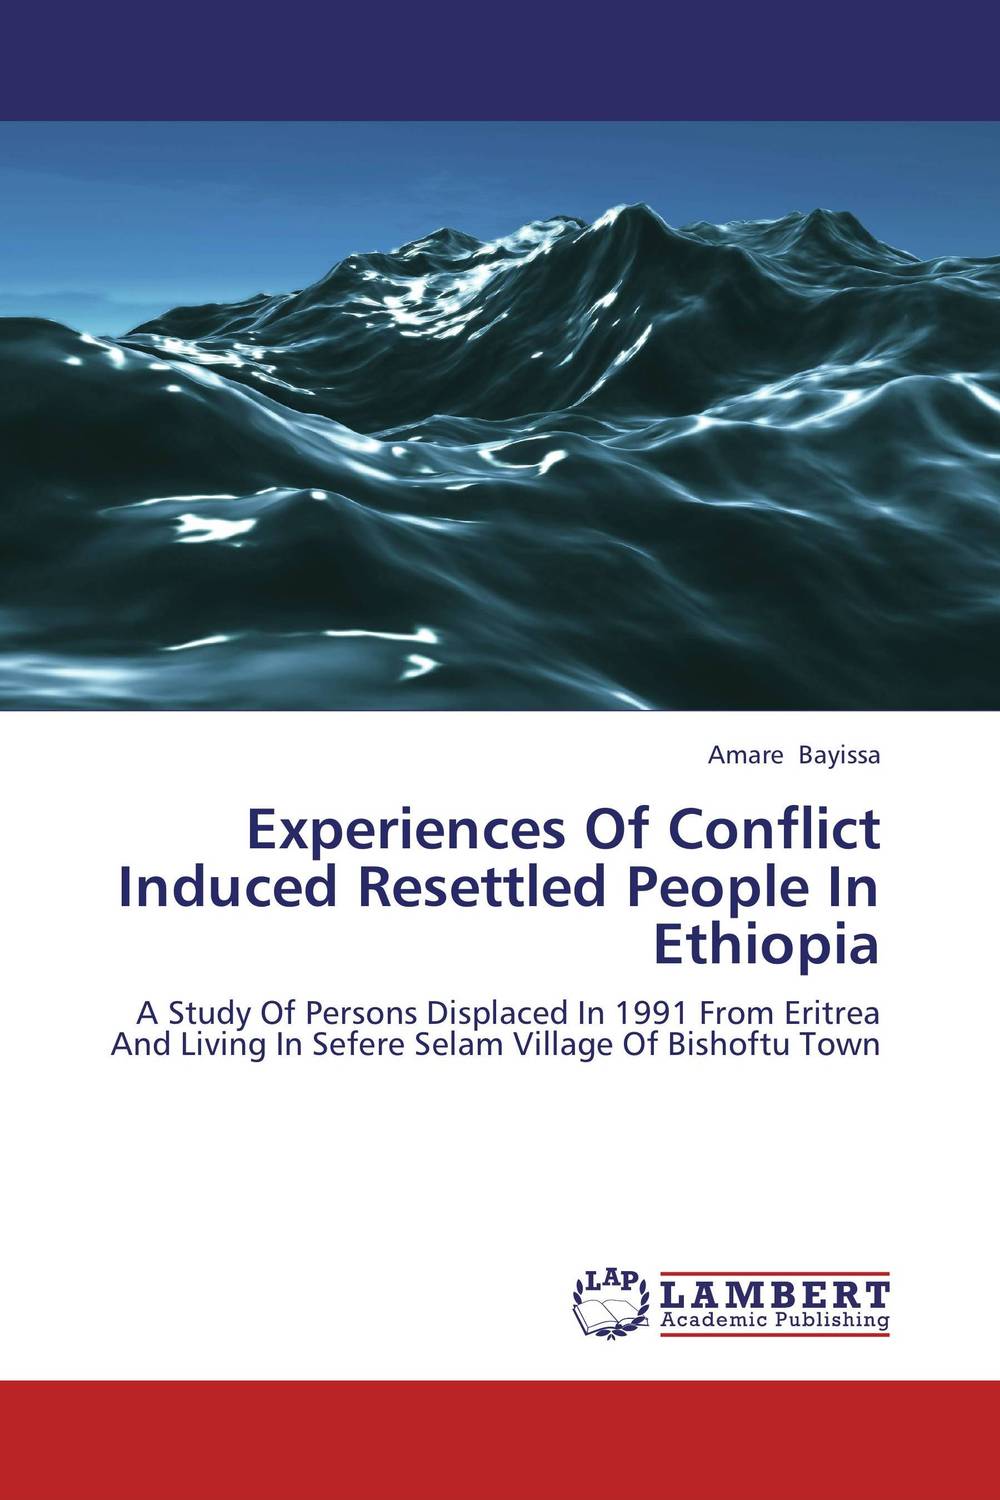 Experiences Of Conflict Induced Resettled People In Ethiopia